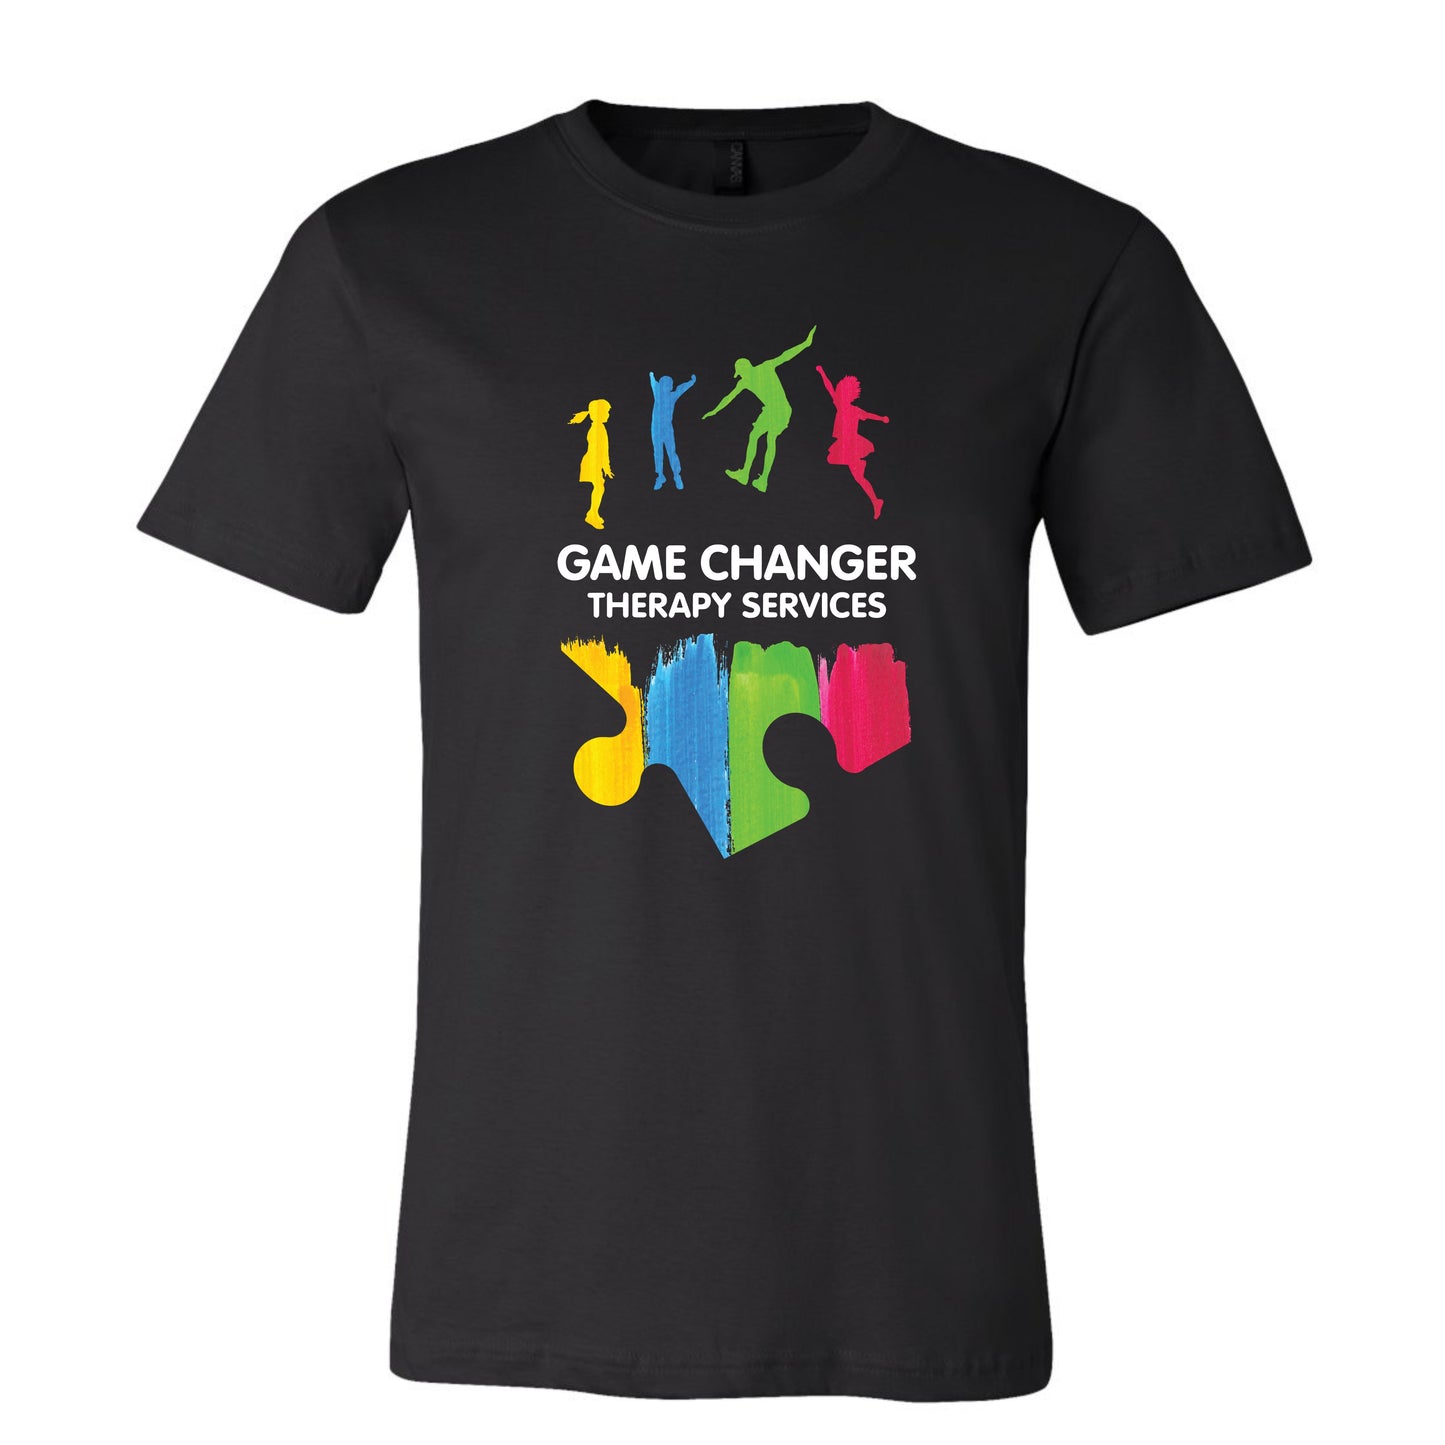 Game Changer Therapy Services Short Sleeve Tee - Full Color Logo